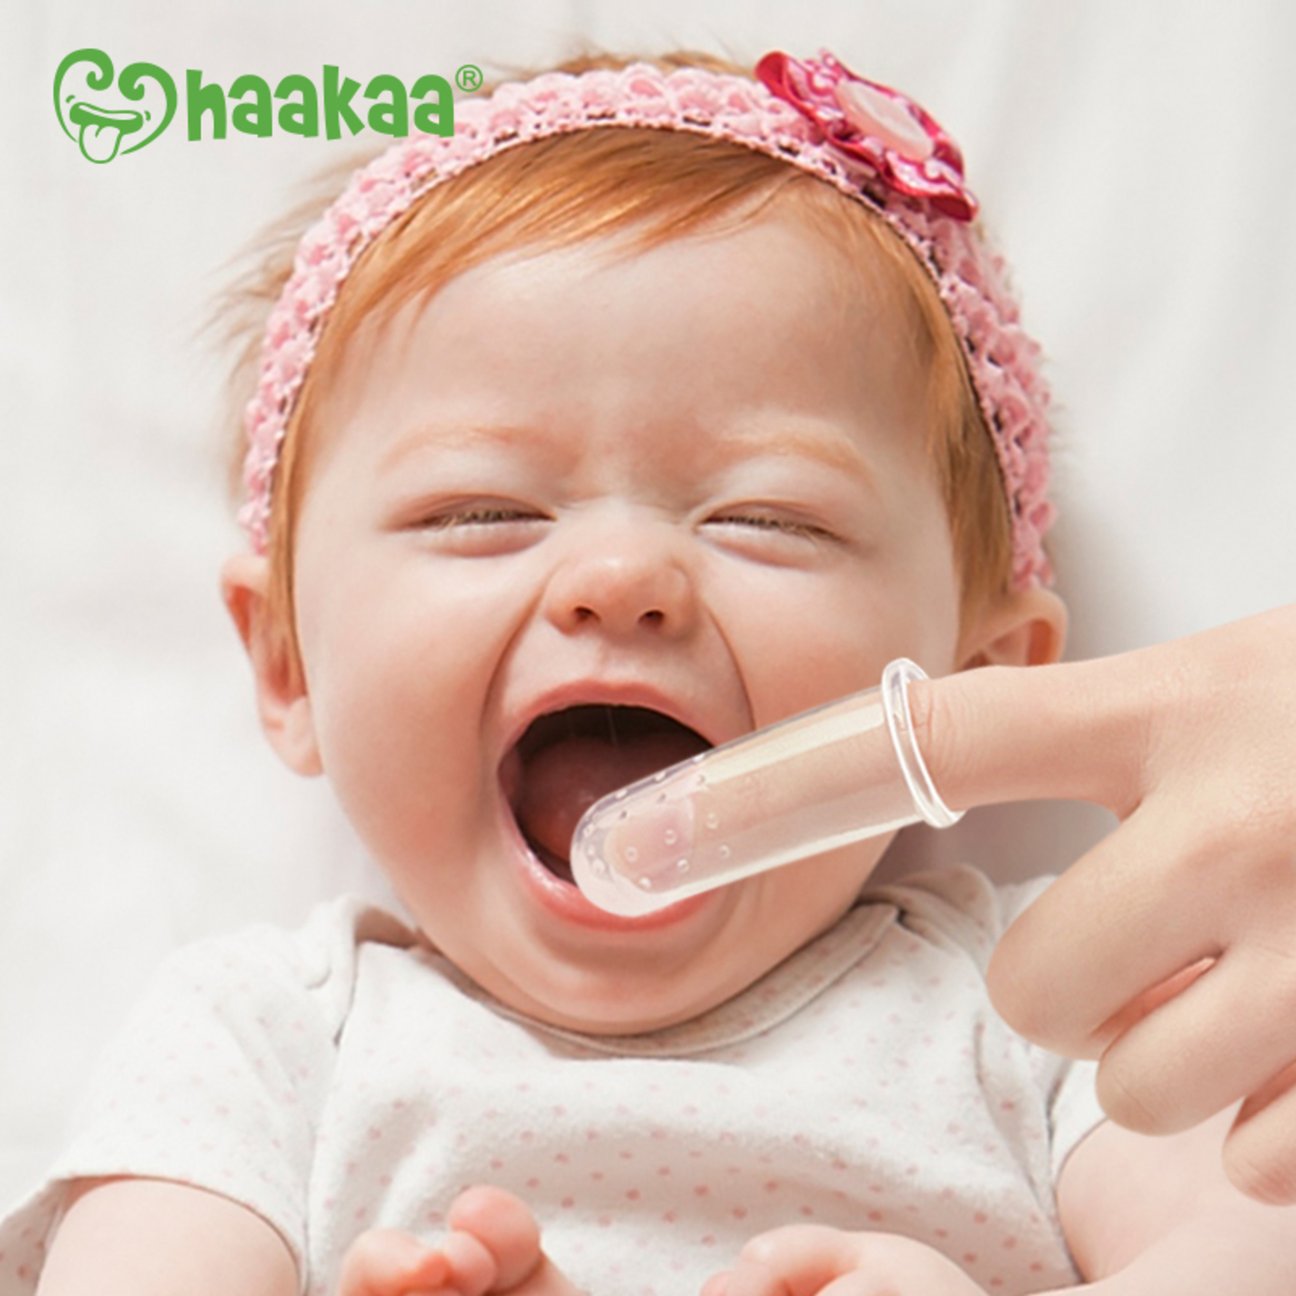 Haakaa Silicone Finger Toothbrush - Clear